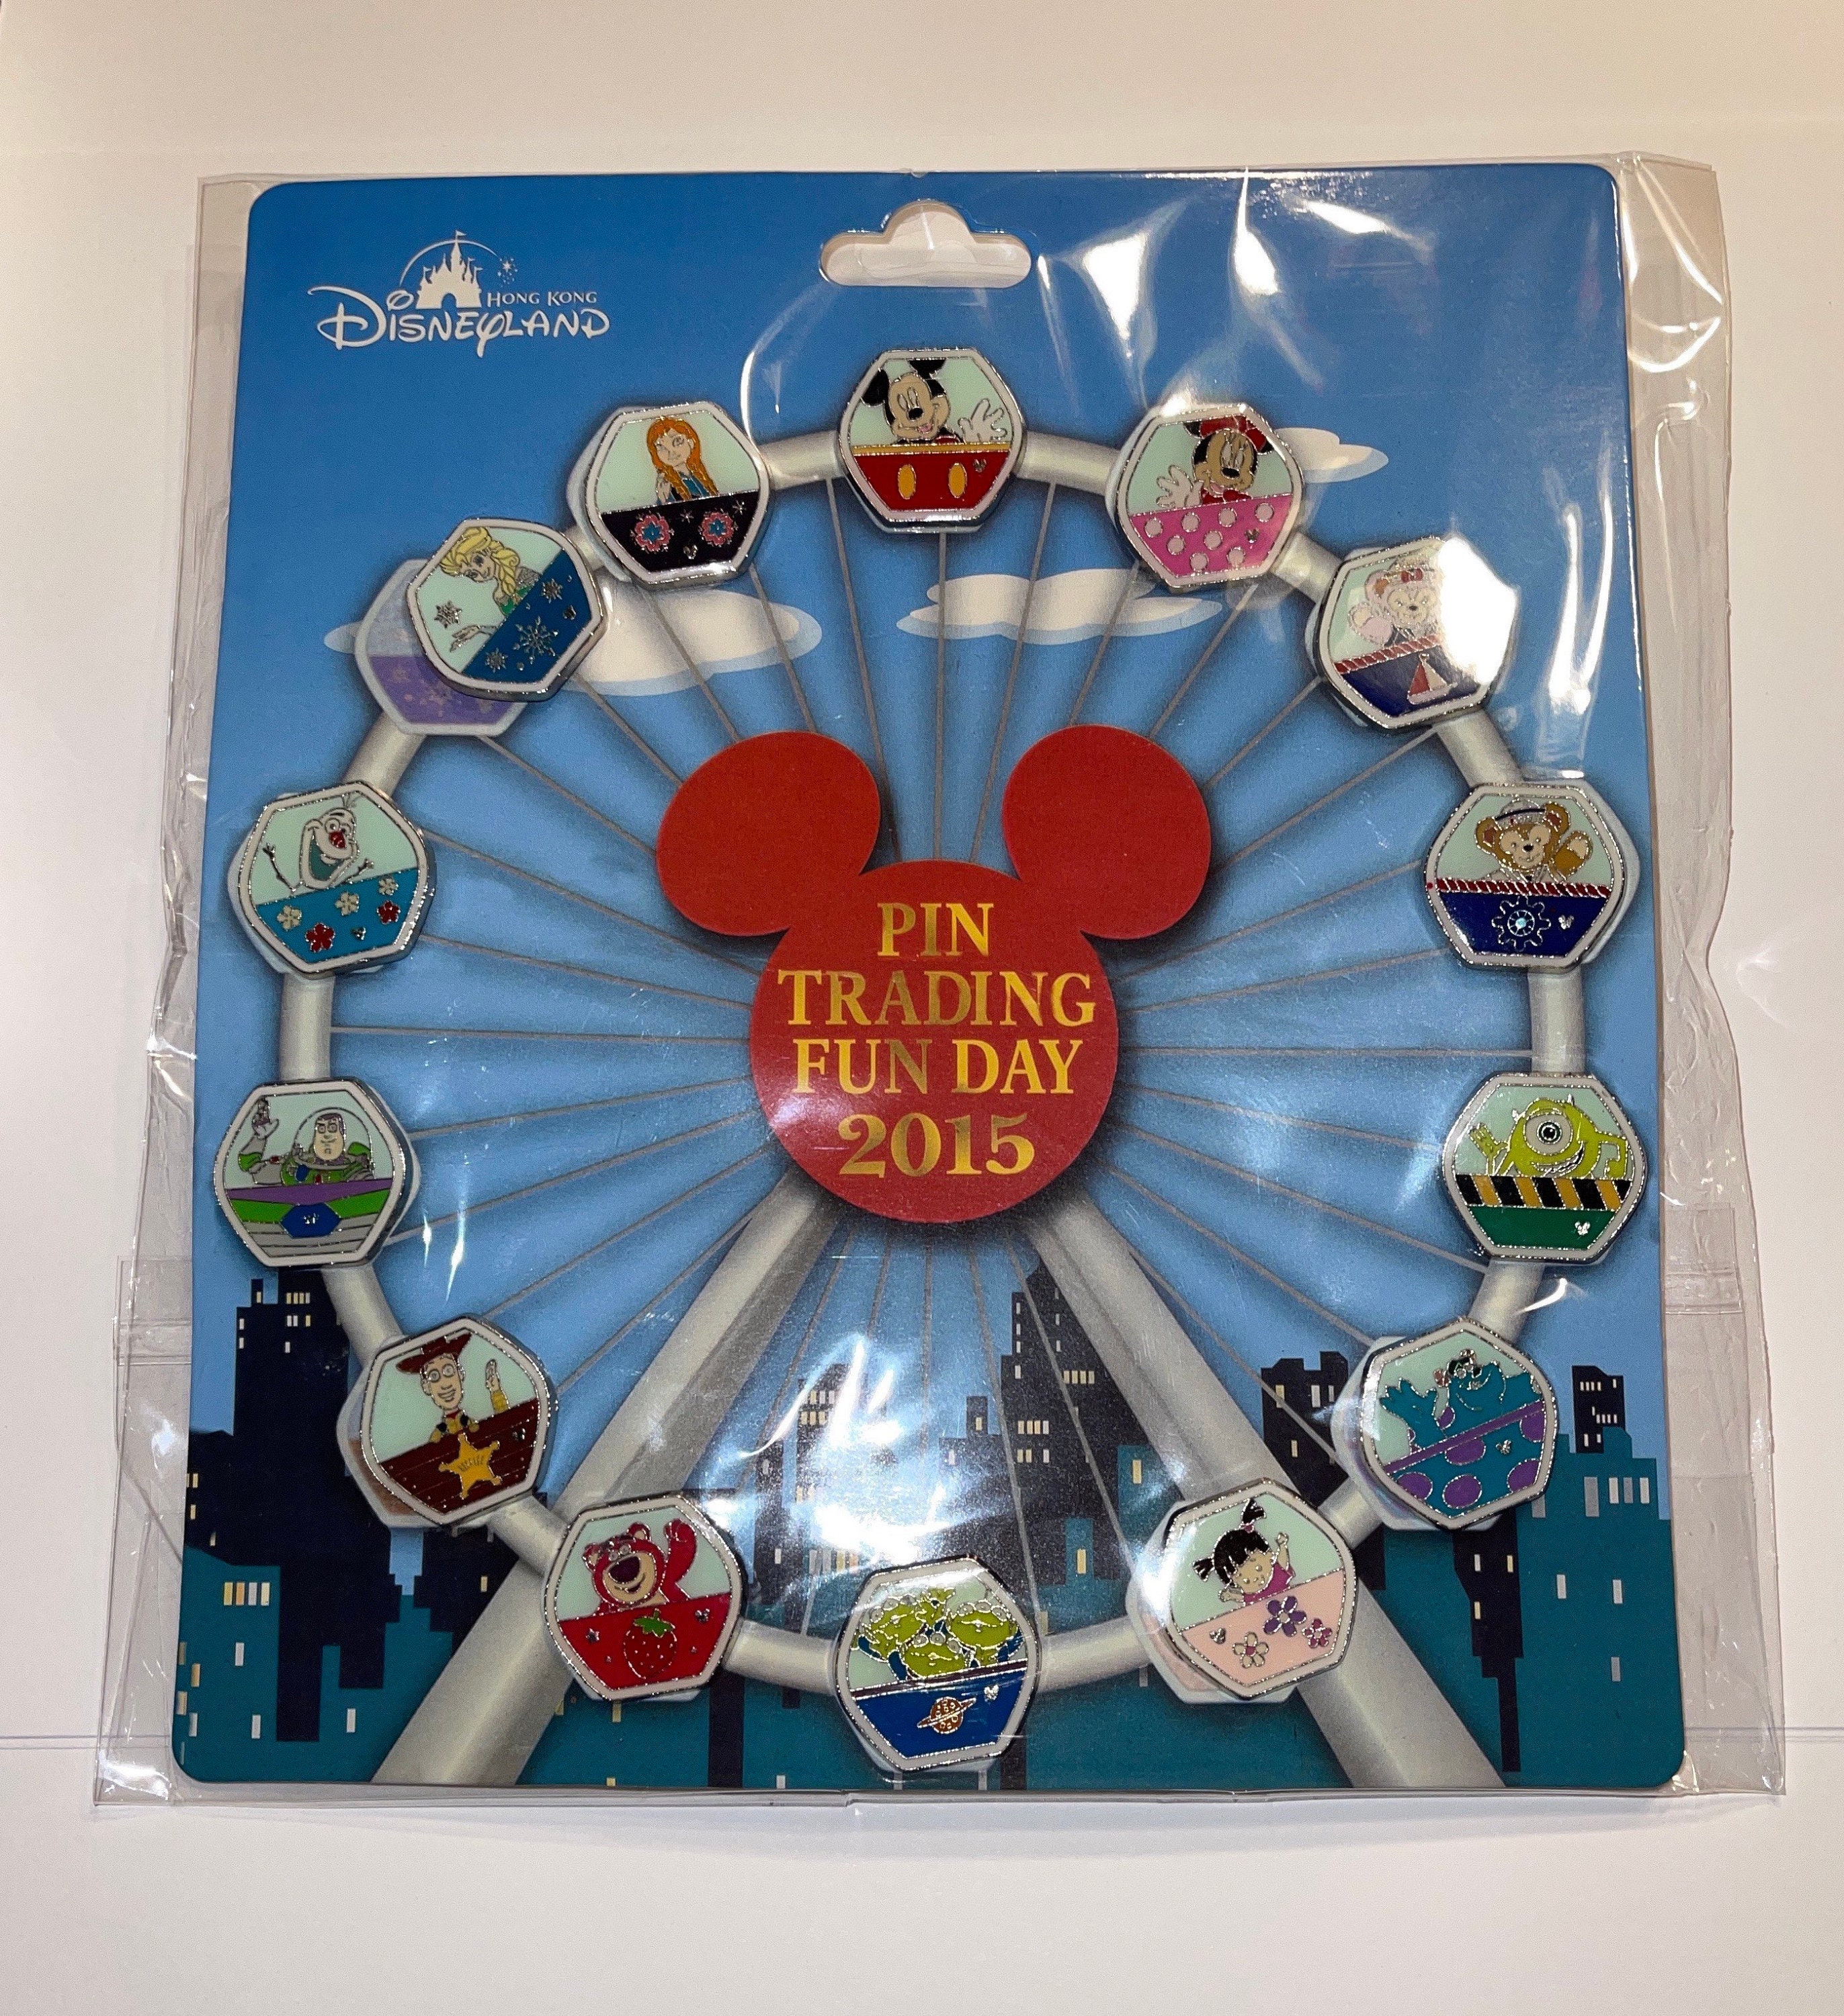 Bundle Up with New Disney Trading Pins with the Purchase of a Holiday Pin  Series Disney Gift Card